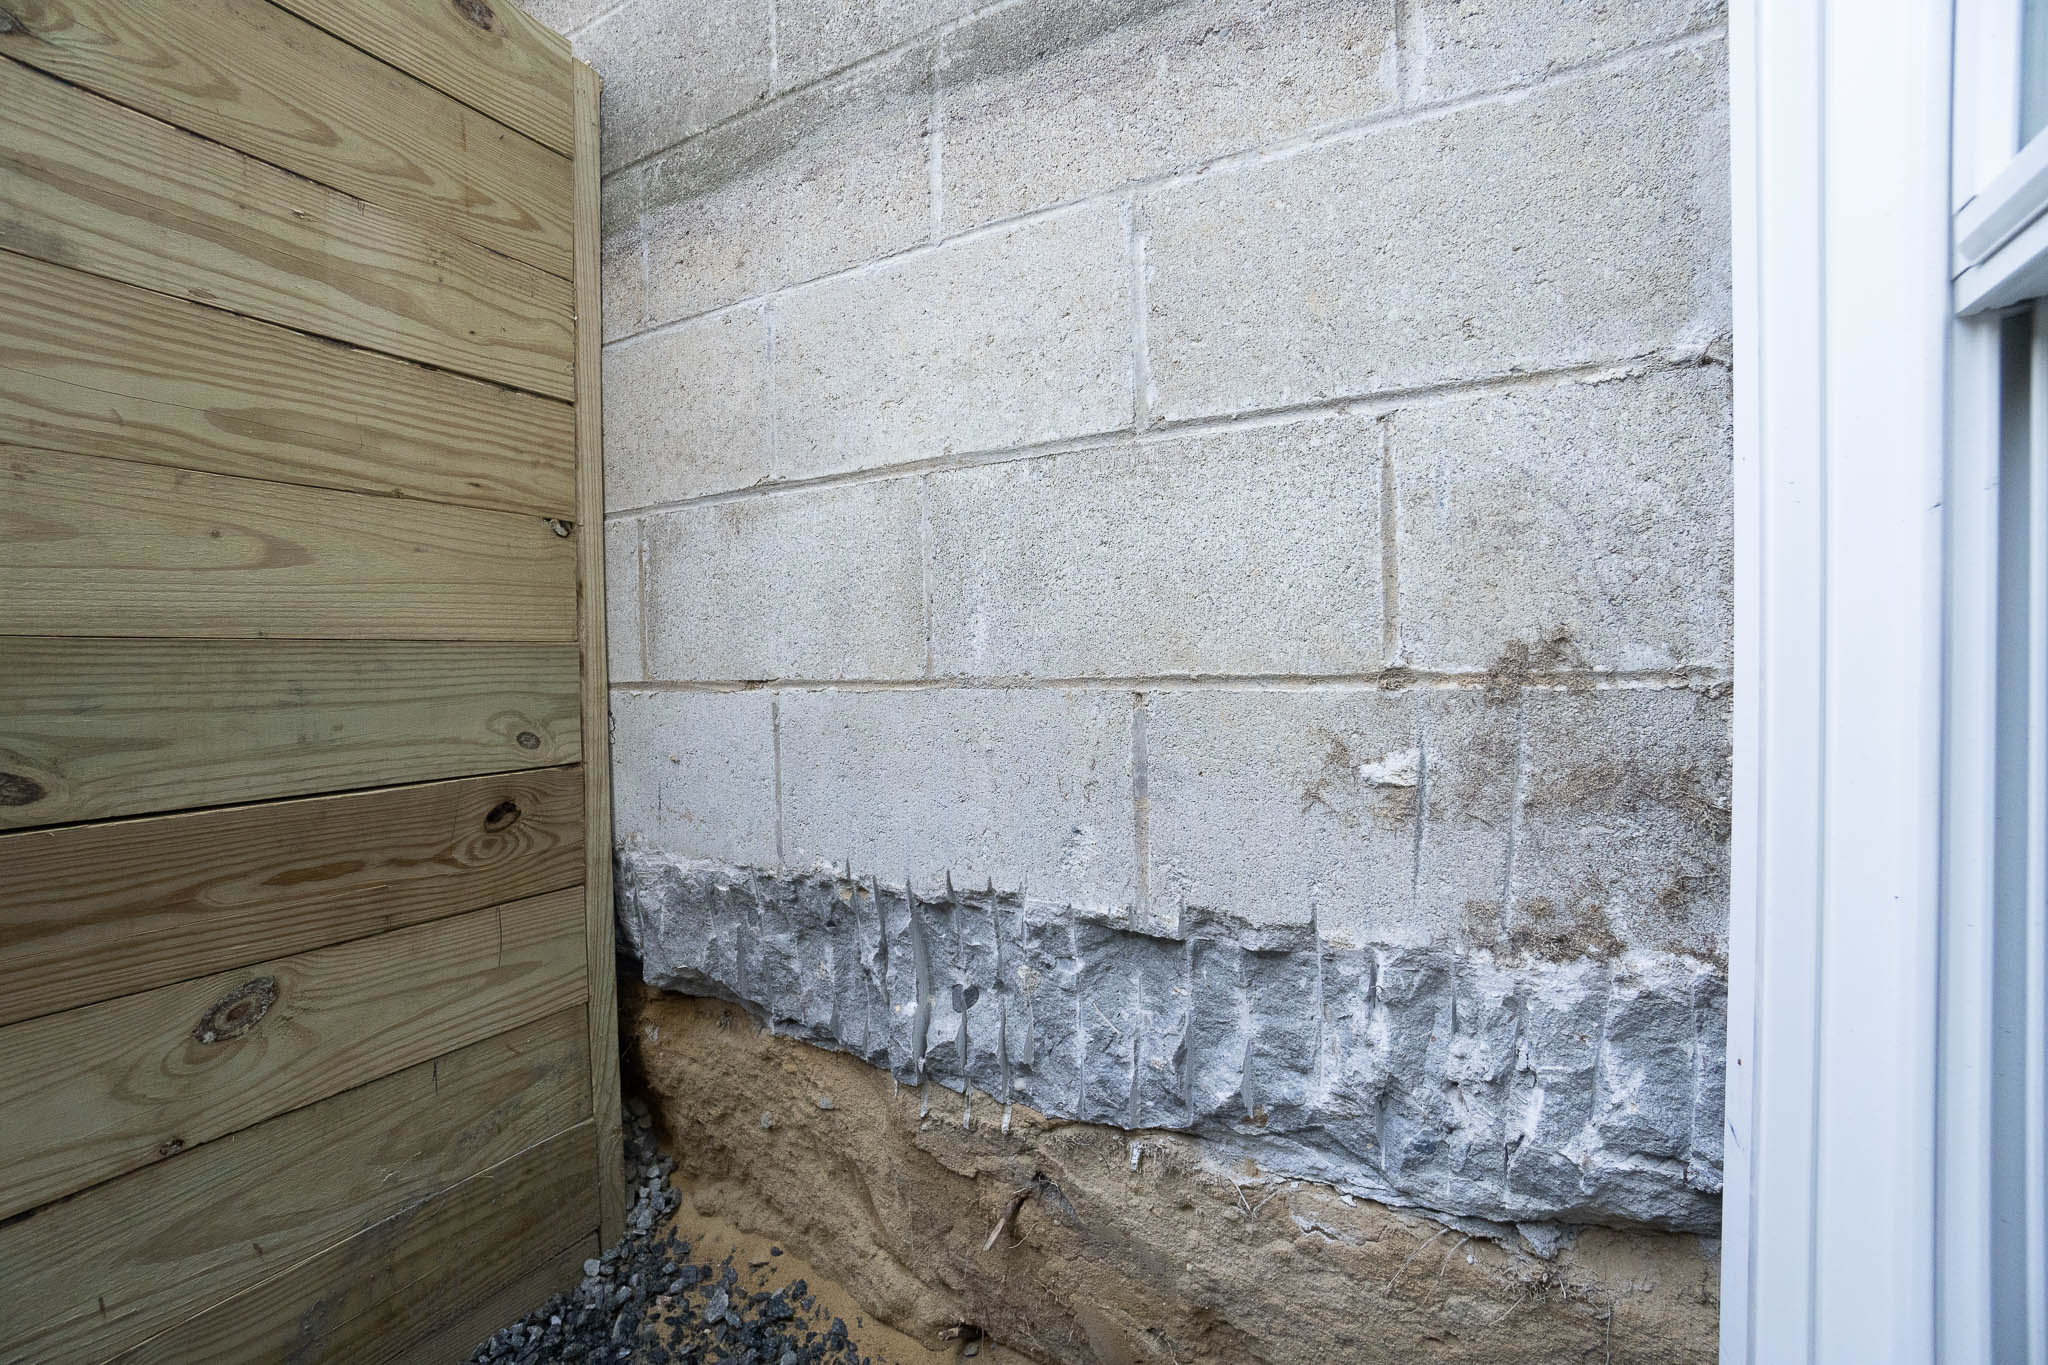 Concrete wall build by cinder block